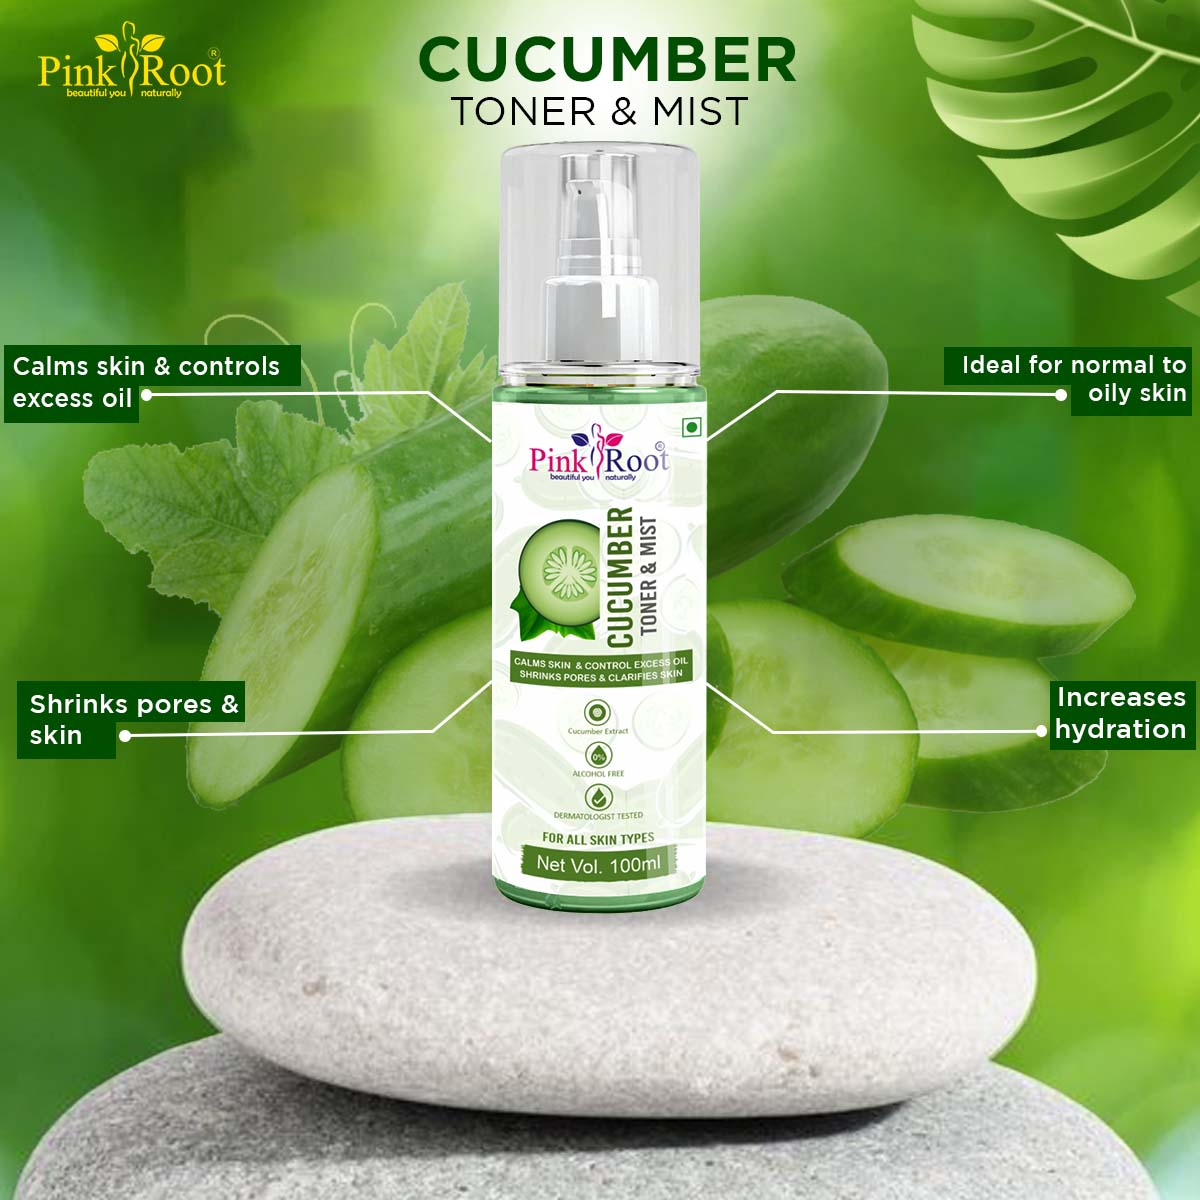 Pink Root Cucumber Toner & Mist 100ml, Hydrating Pore Tightening Moisturizing Revitalising Face Spray Toner for All Skin Types, Natural, No Alcohol, Parabens & Sulphates